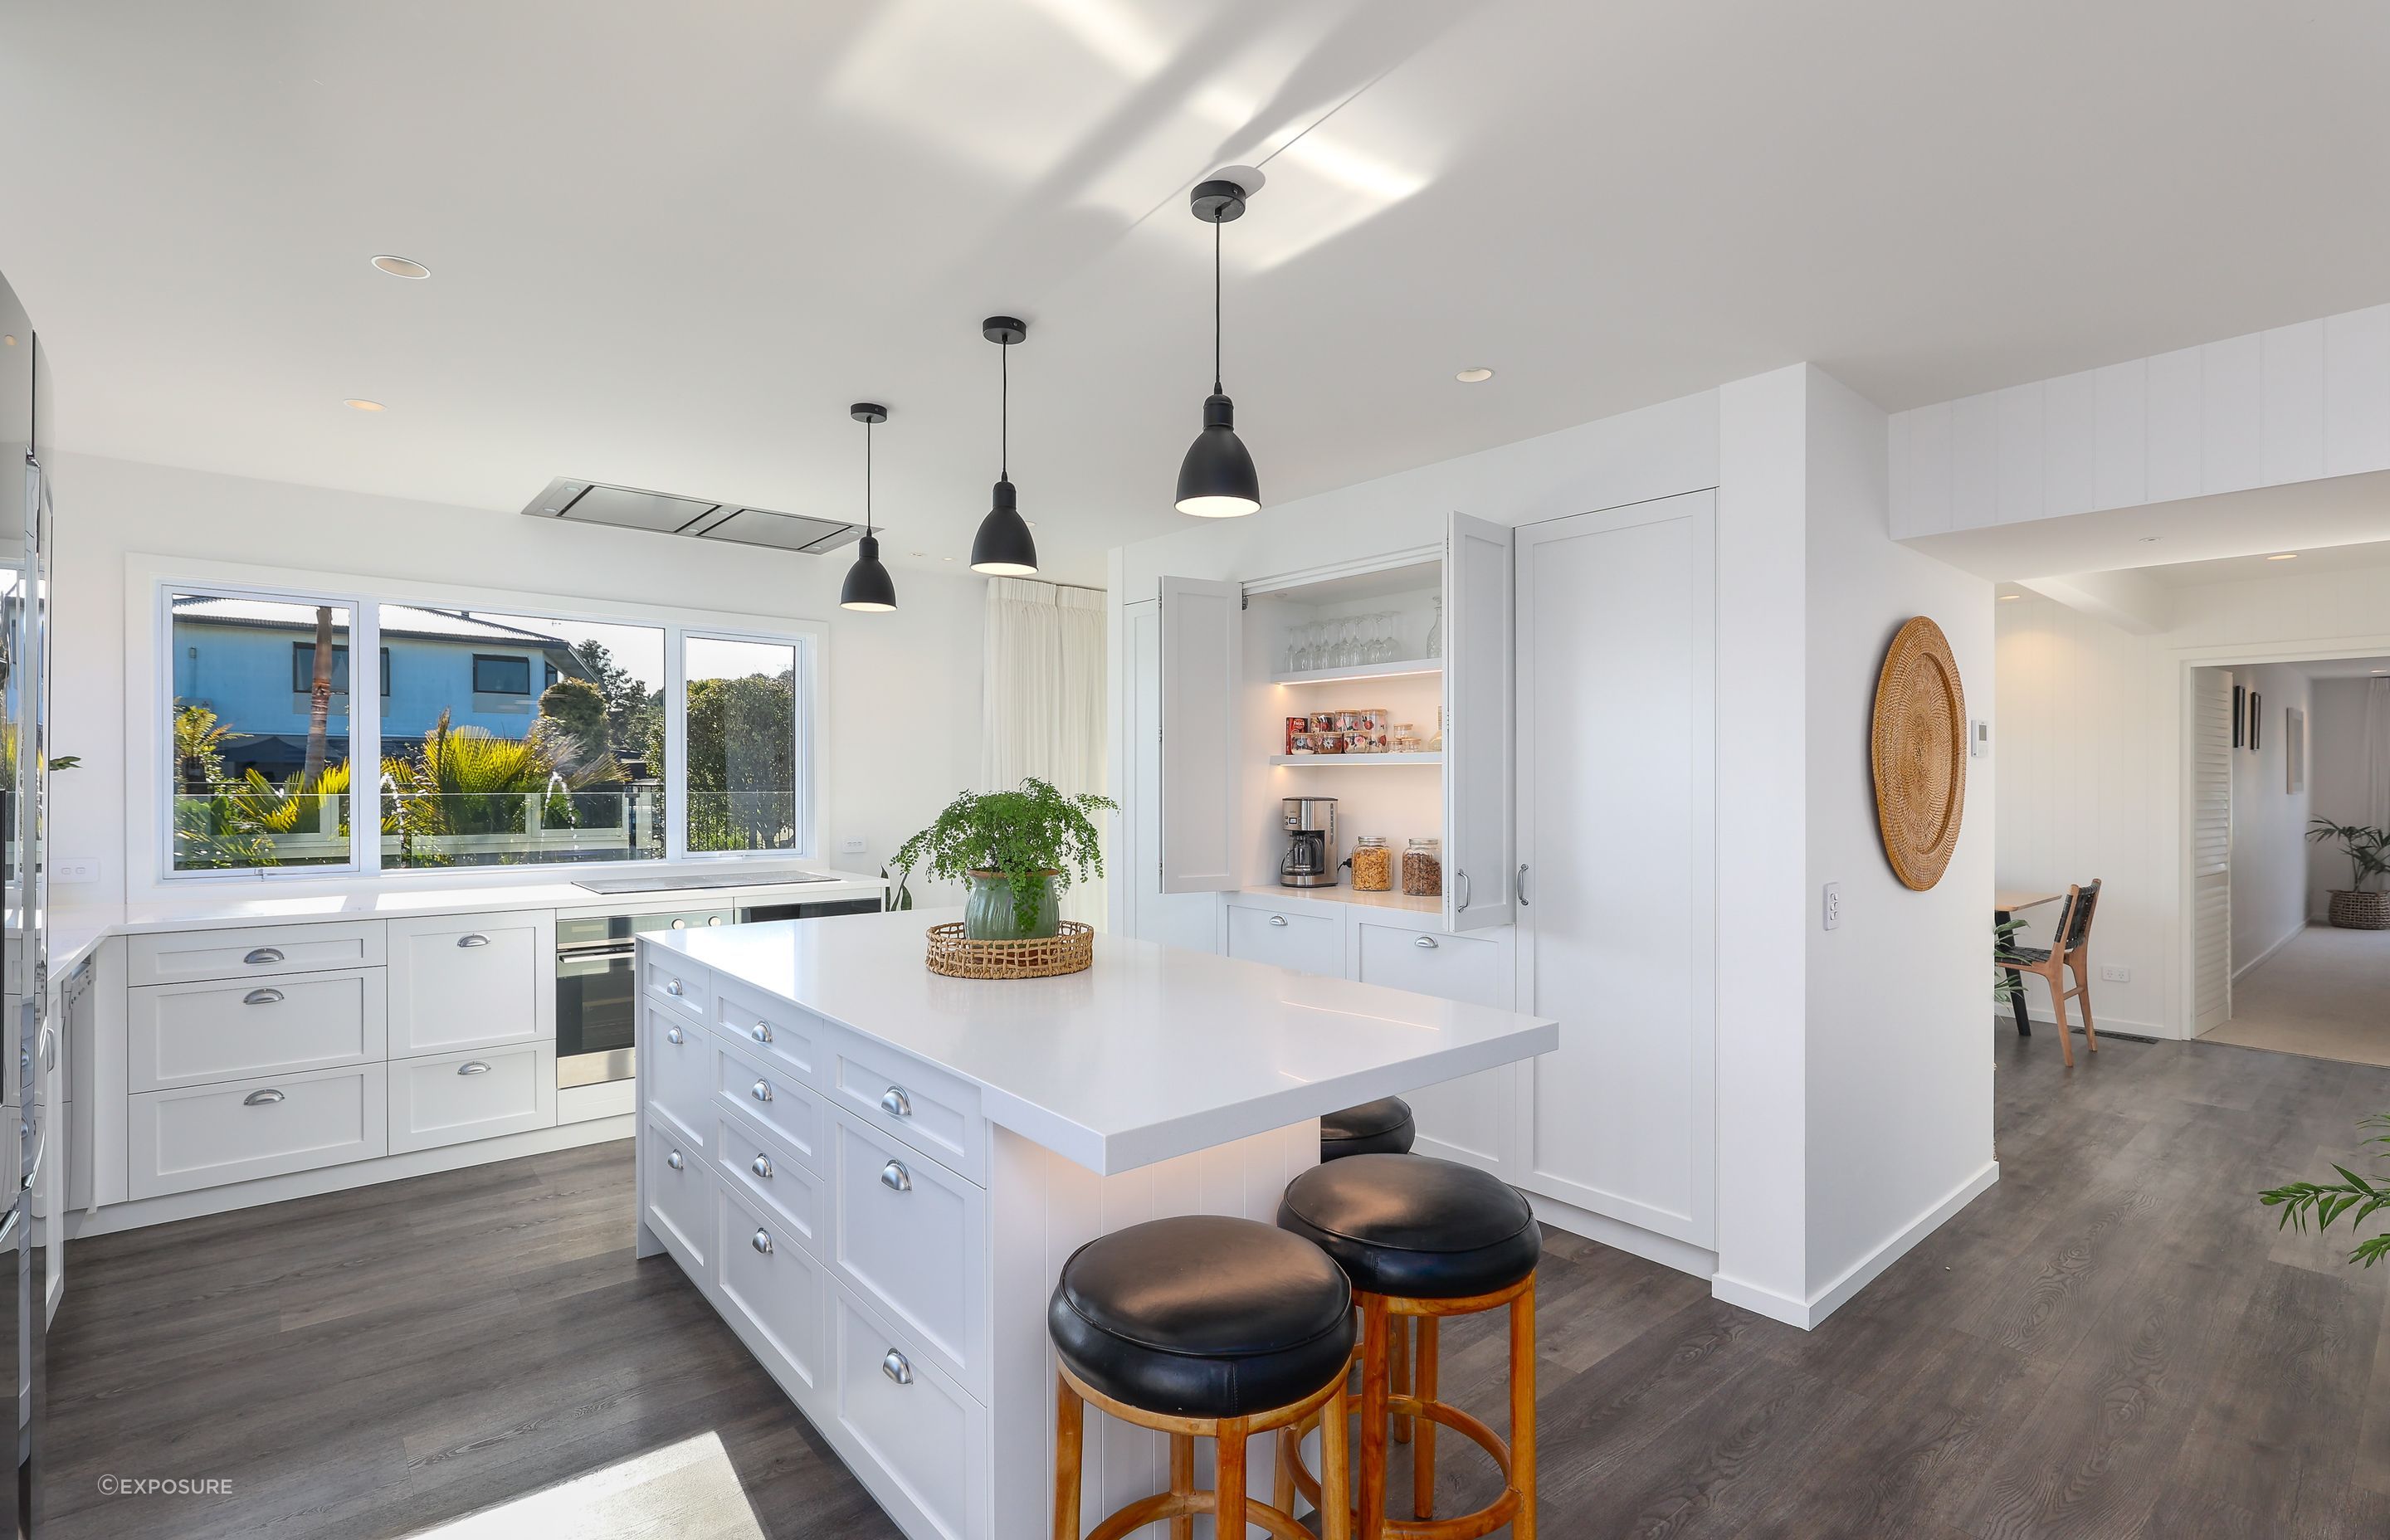 The spacious Cooper Webley designed kitchen is a chef's dream.